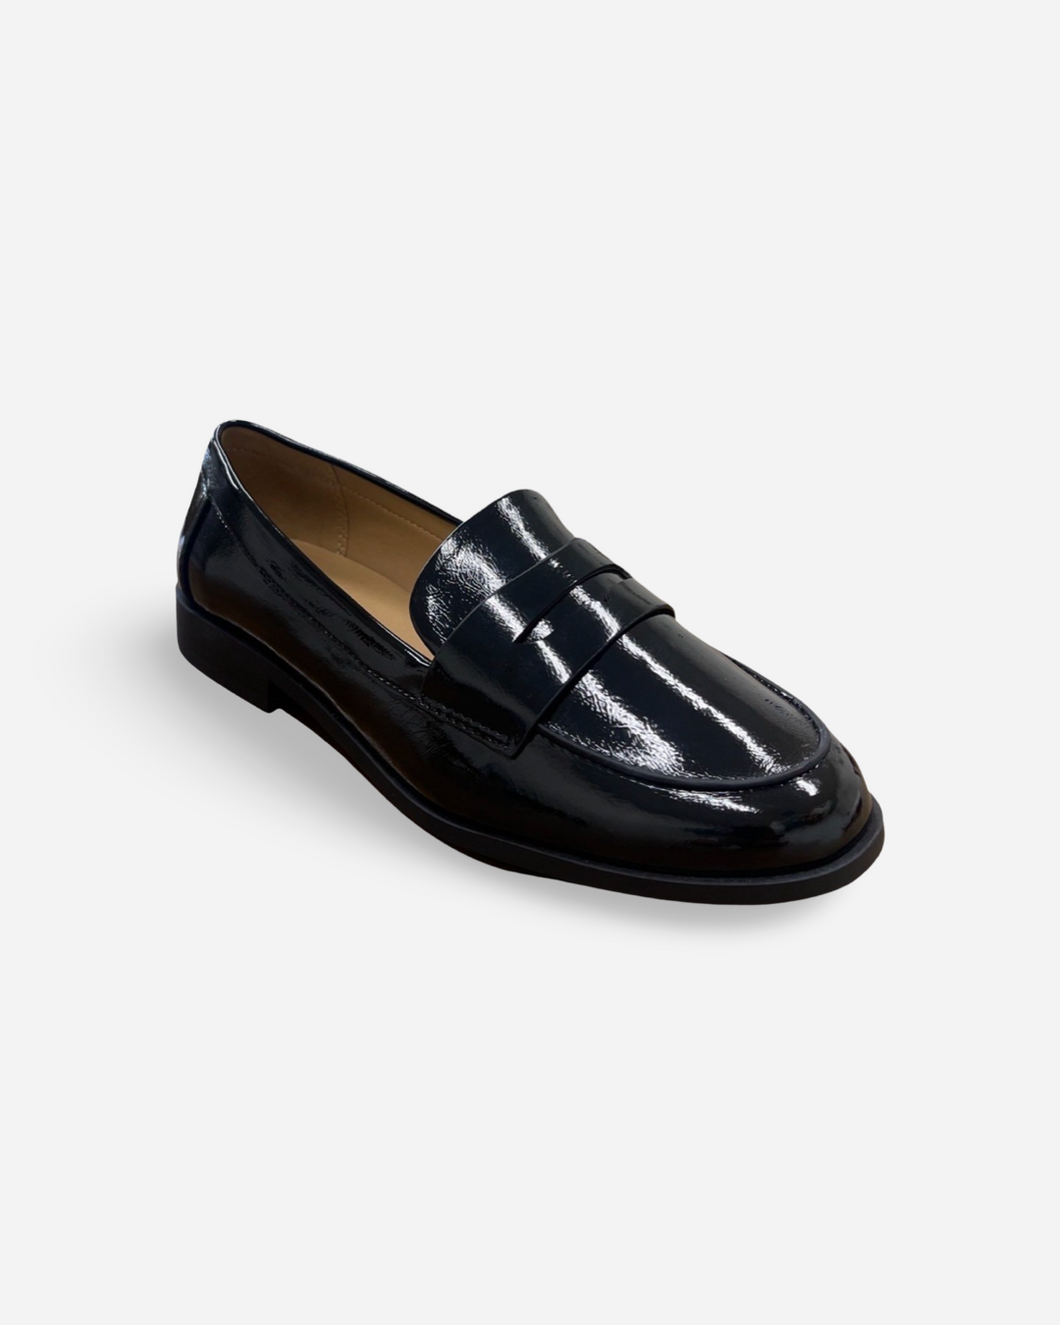 Soda Snack Patent Loafer Flats